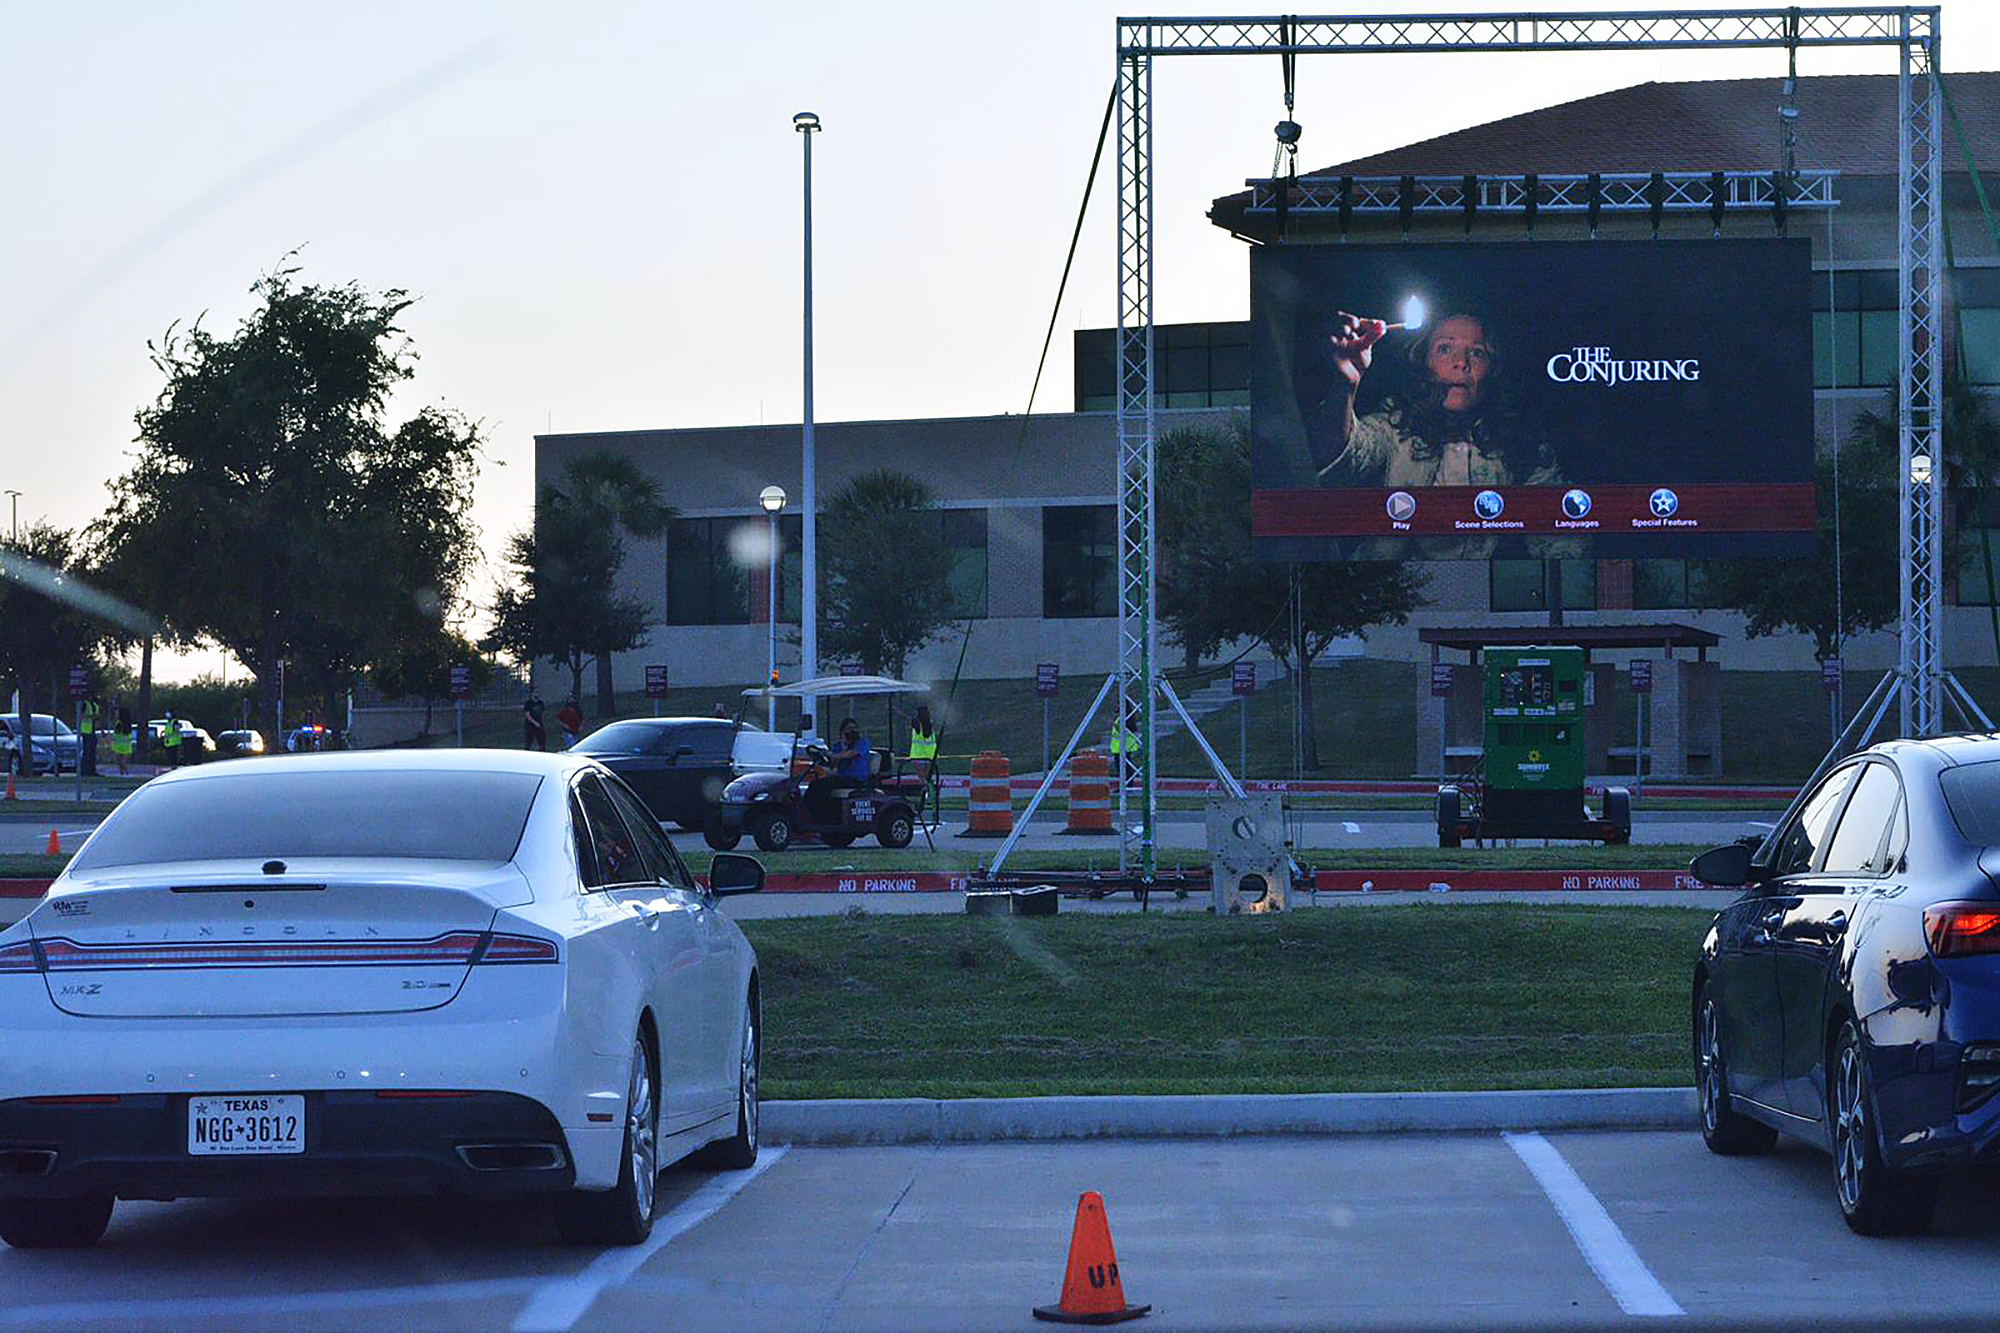 Drive-in Movie event provides entertainment, social distancing